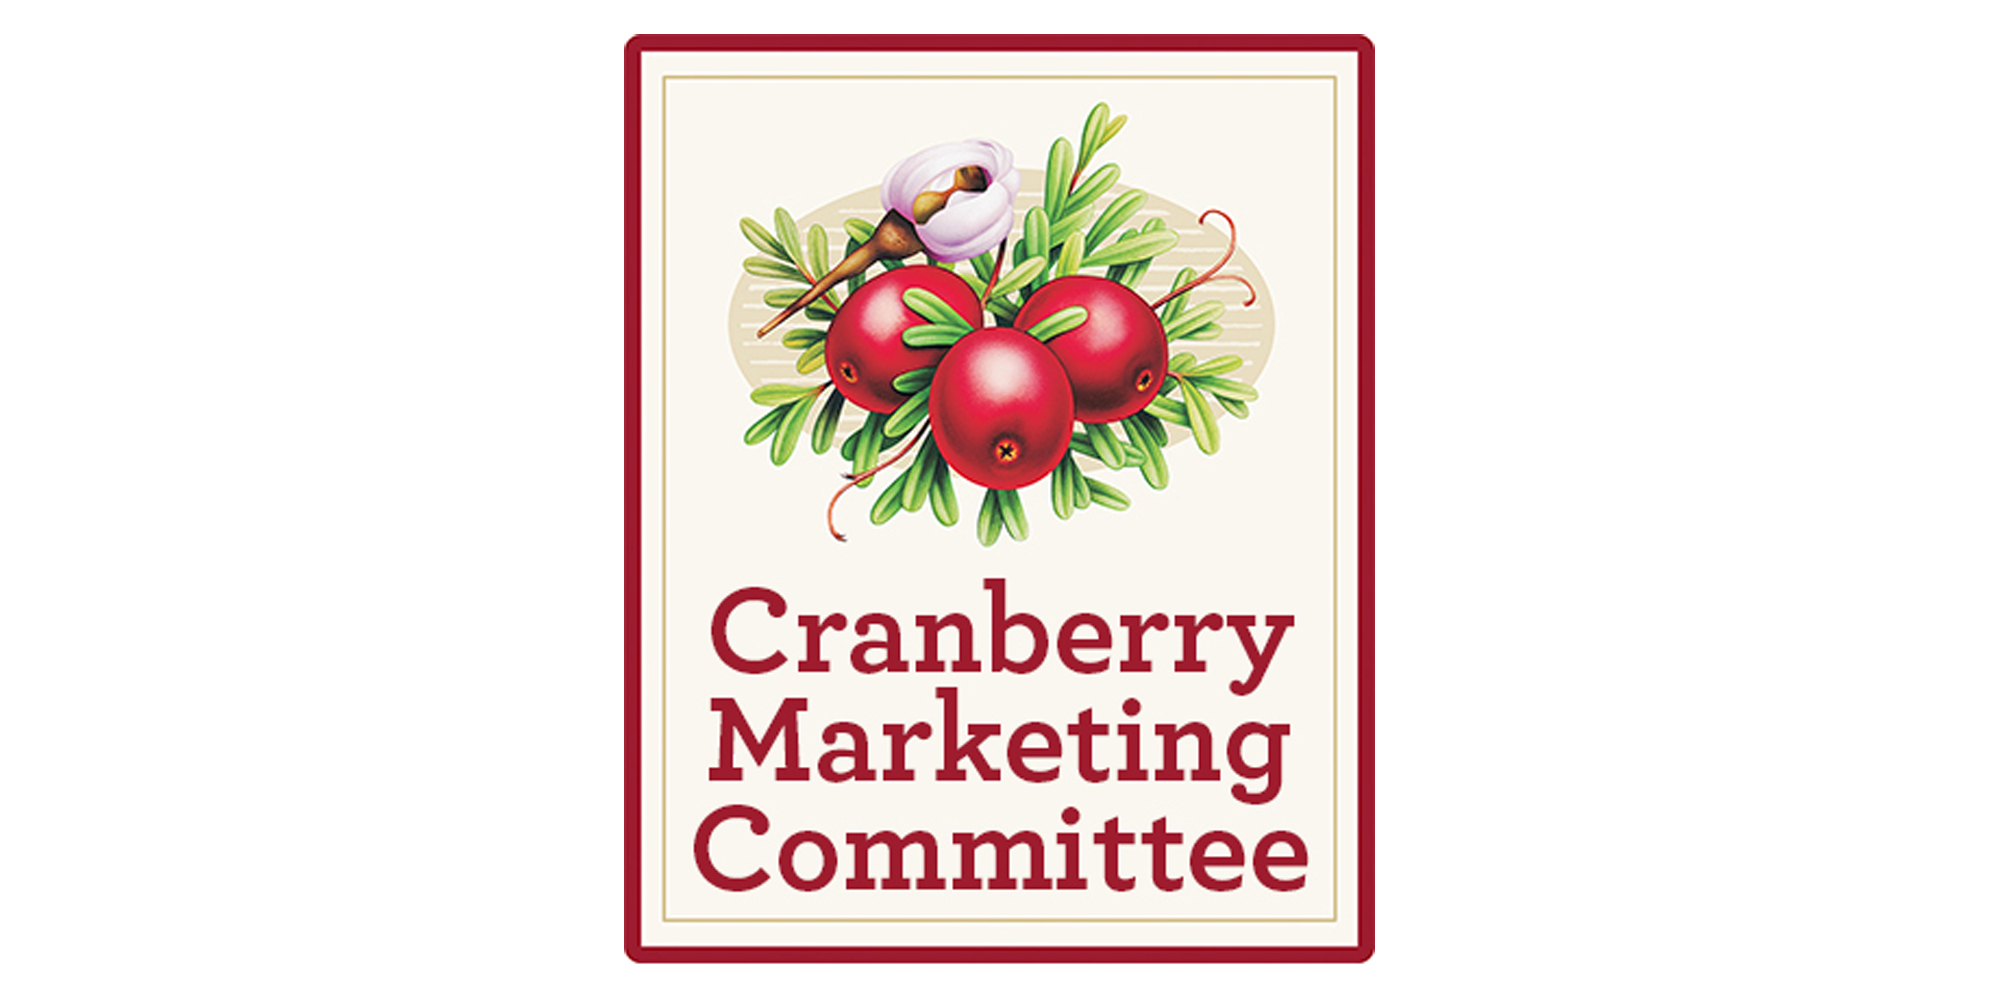 Cranberry Marketing Committee Appoints New Executive Director